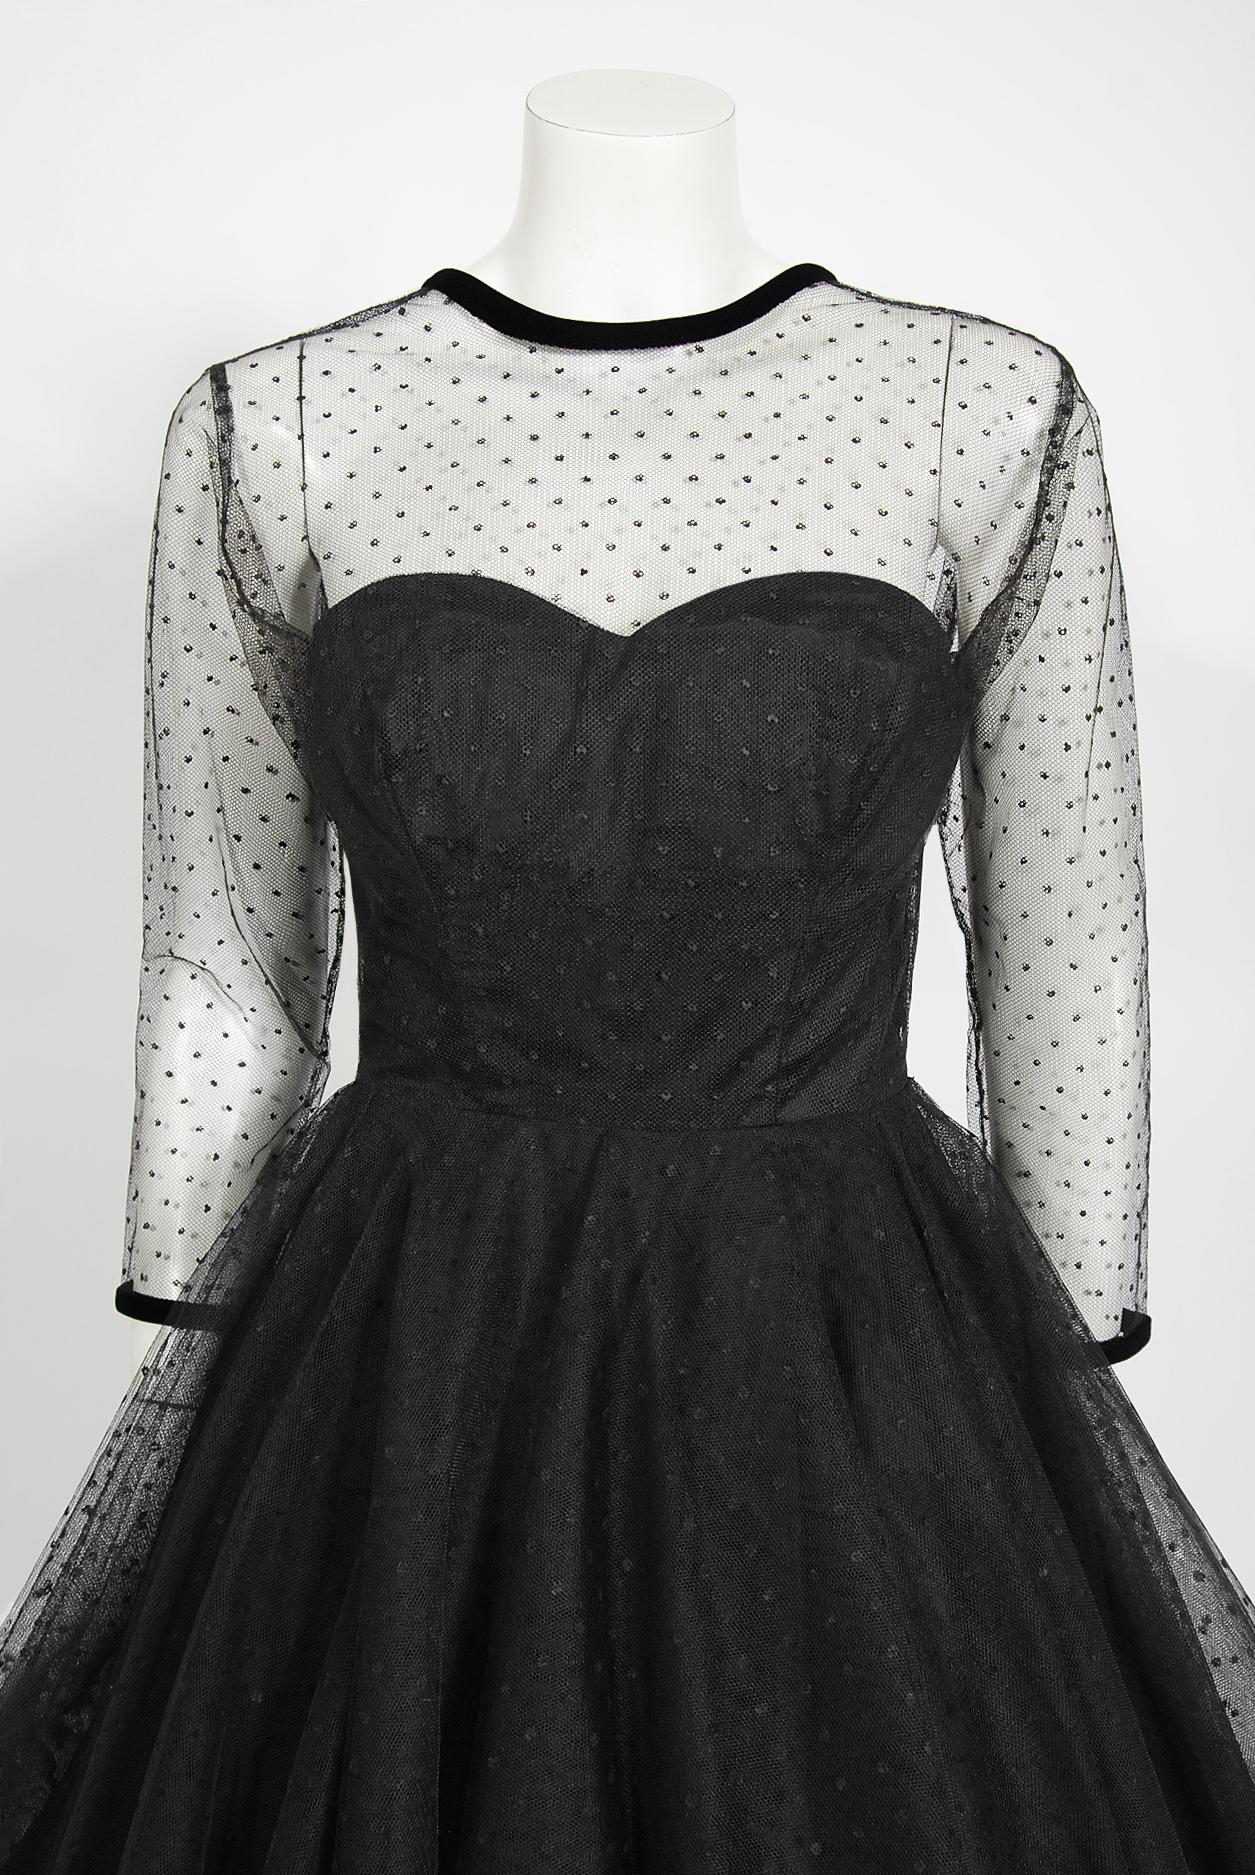 Gorgeous mid 1950's sheer black dotted net tulle party dress by the high-end Rappi label. Rappi was a talented Viennese-born woman named Syd Rappaport who made a name for herself with glamorous formal wear which was much beloved by debutantes with a